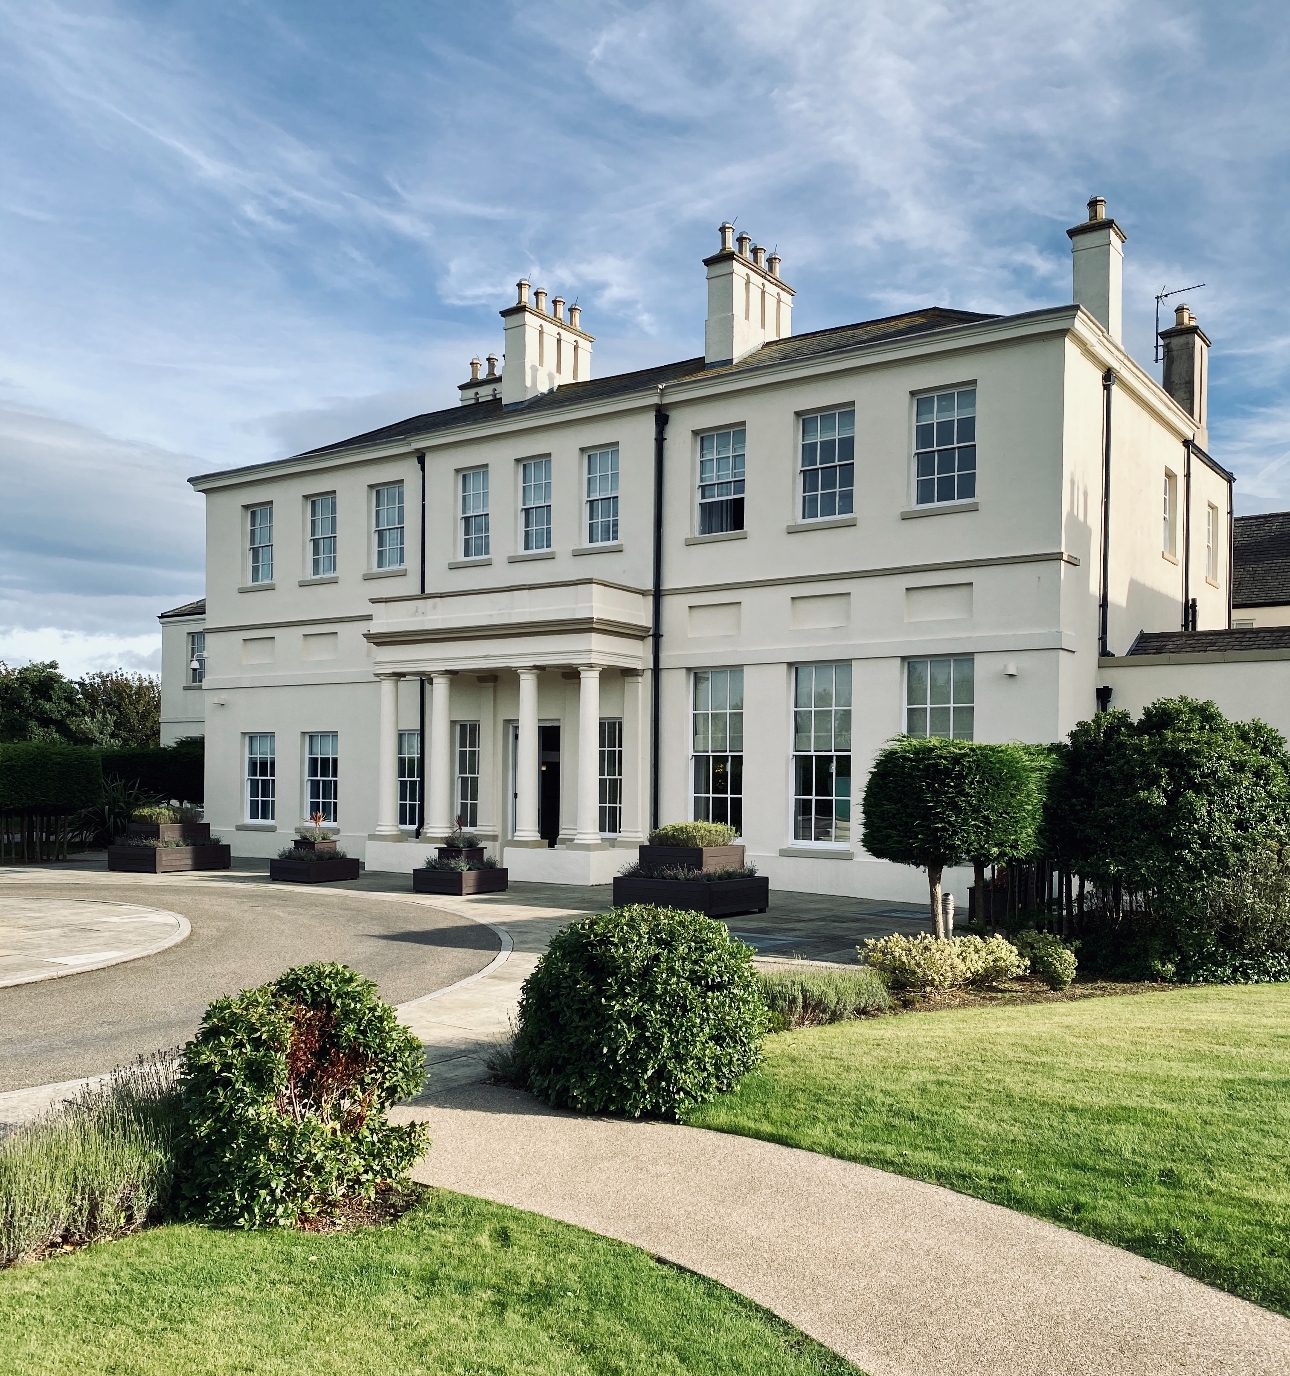 Seaham Hall white mansion with grass and paths surrounding it on sunny day